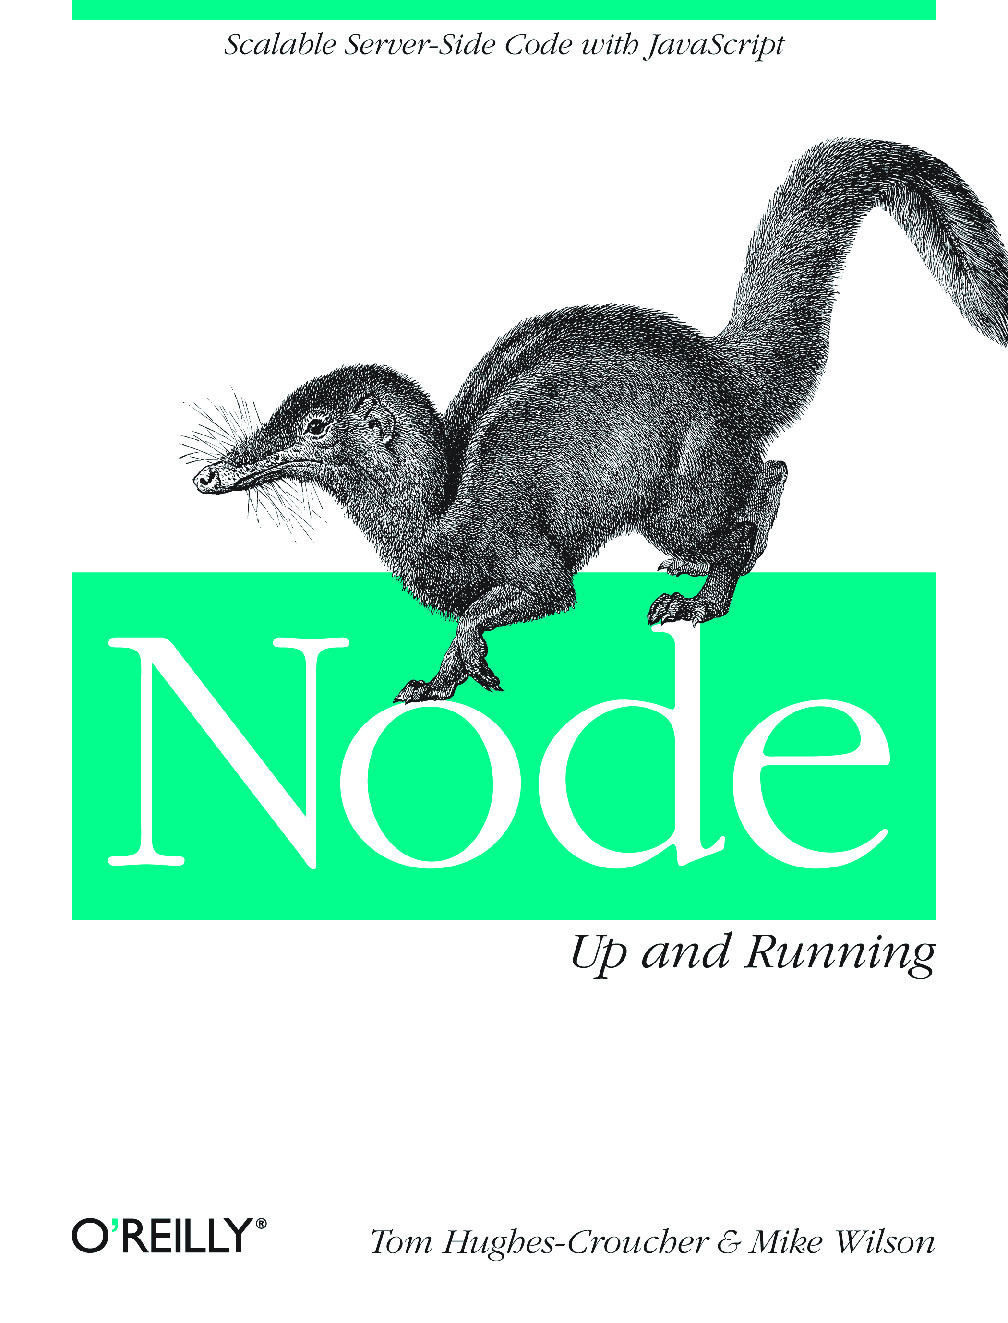 Node Up and Running